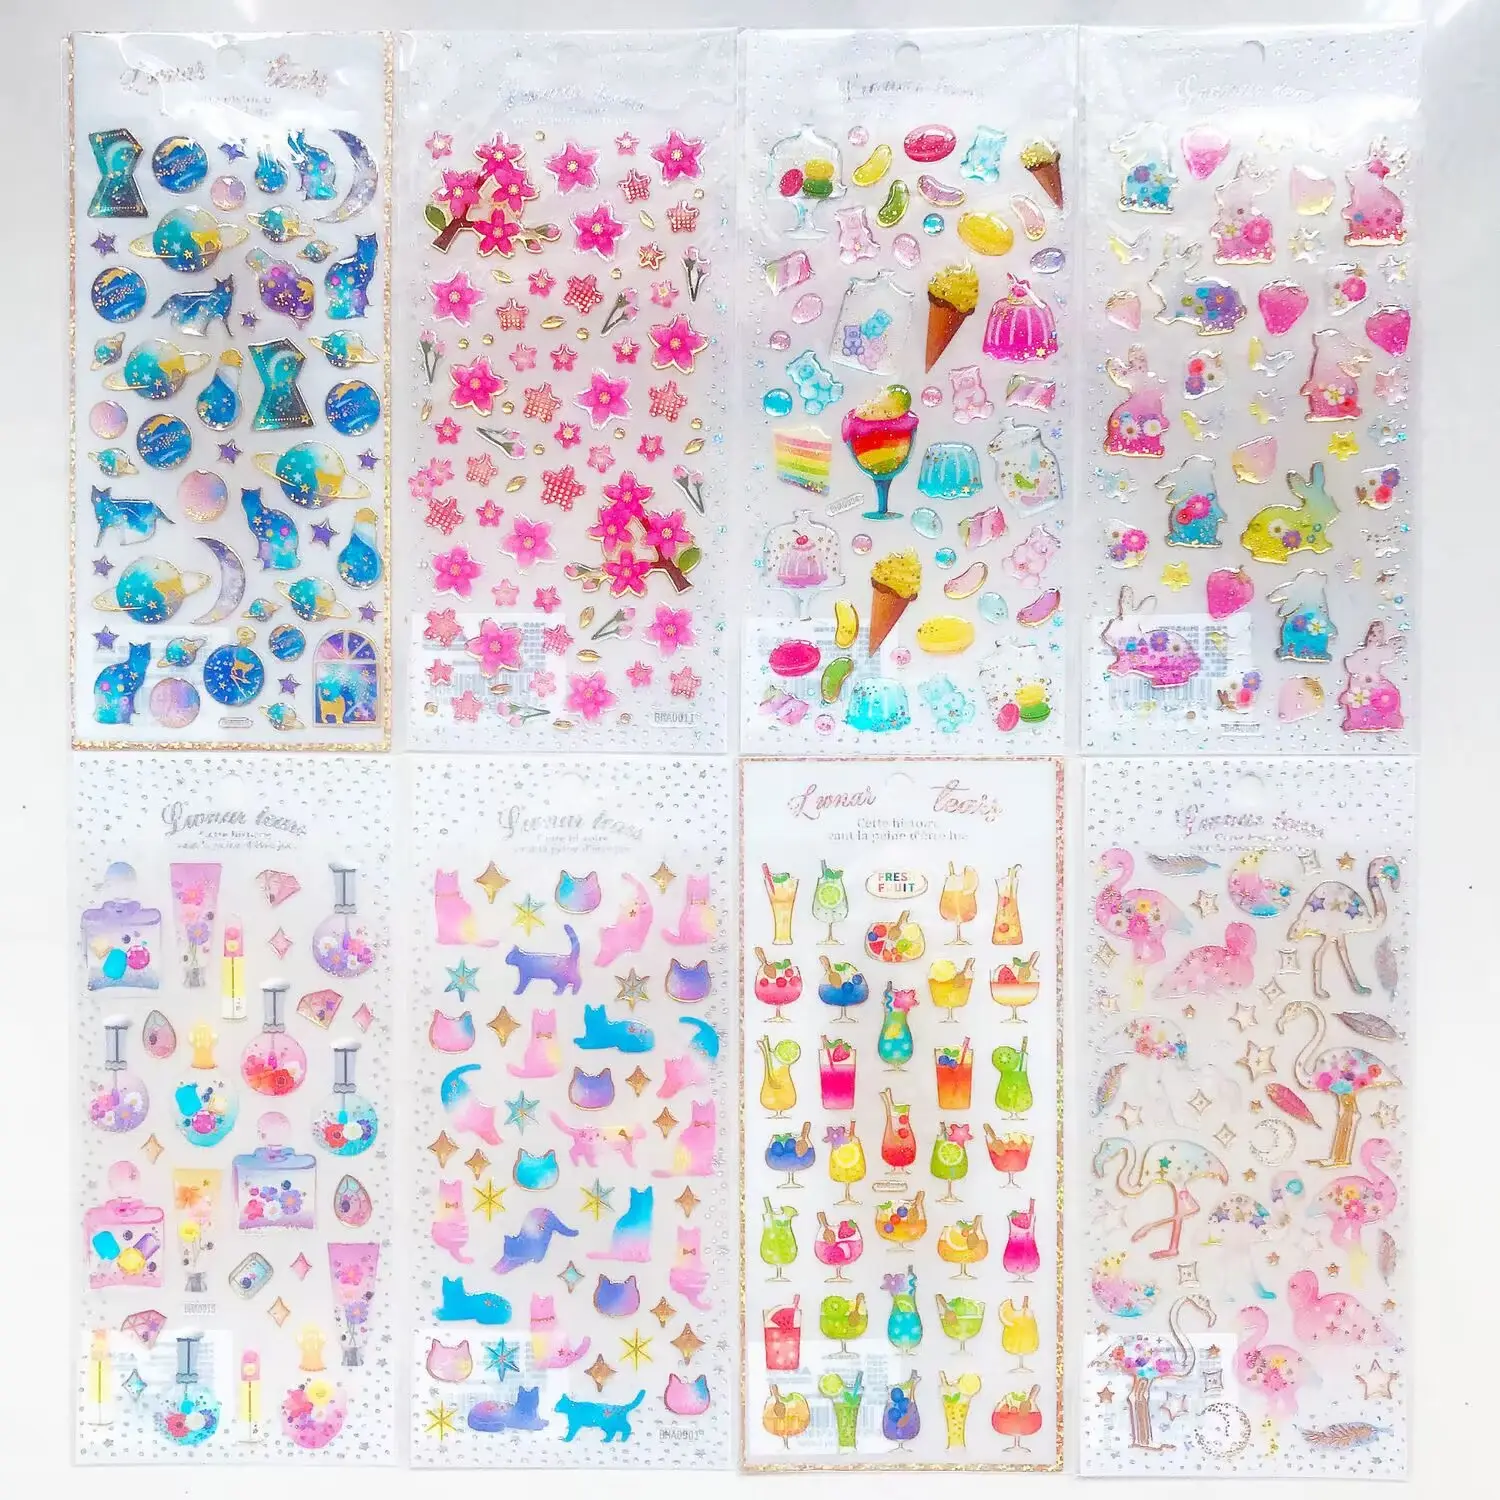 Top Quality Custom Puffy Sticker Maker for Scrapbooking